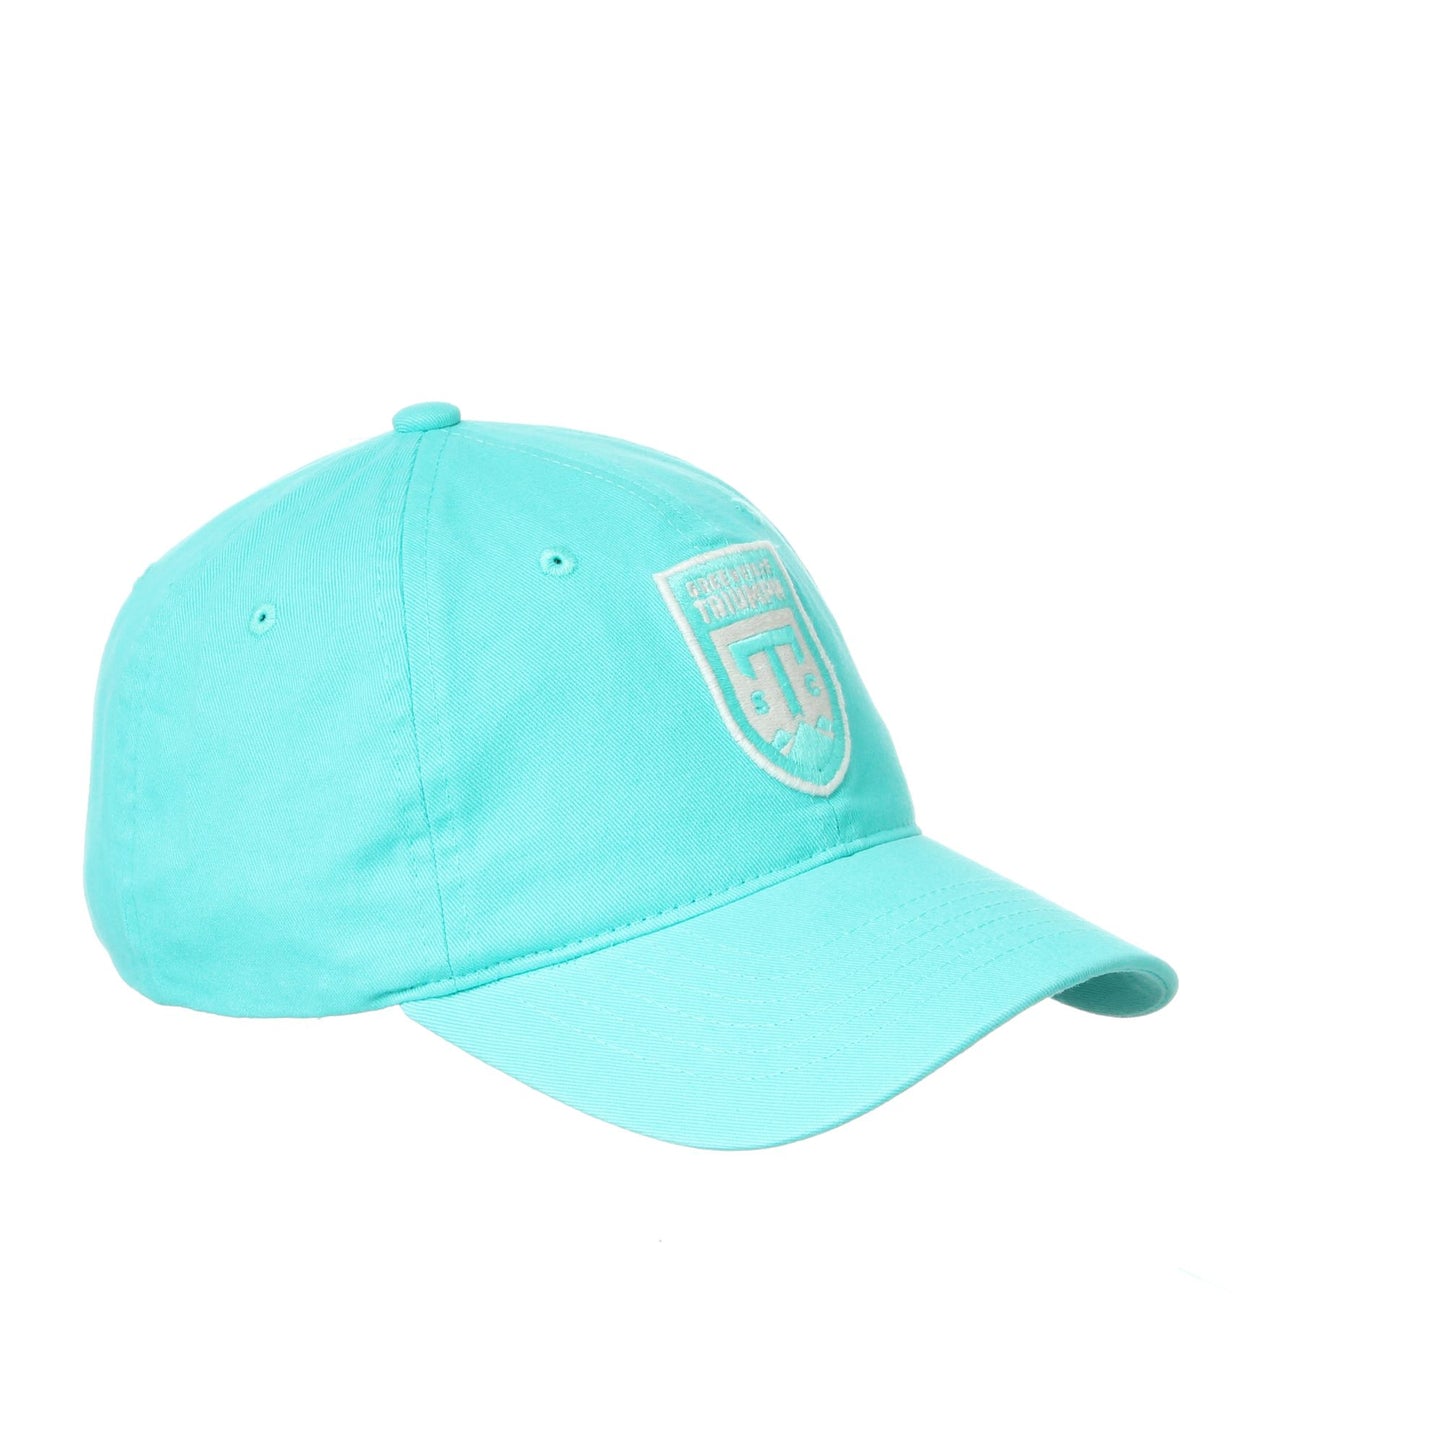 Triumph Scholarship Relaxed Fit Adjustable Hat - Tiffany Blue